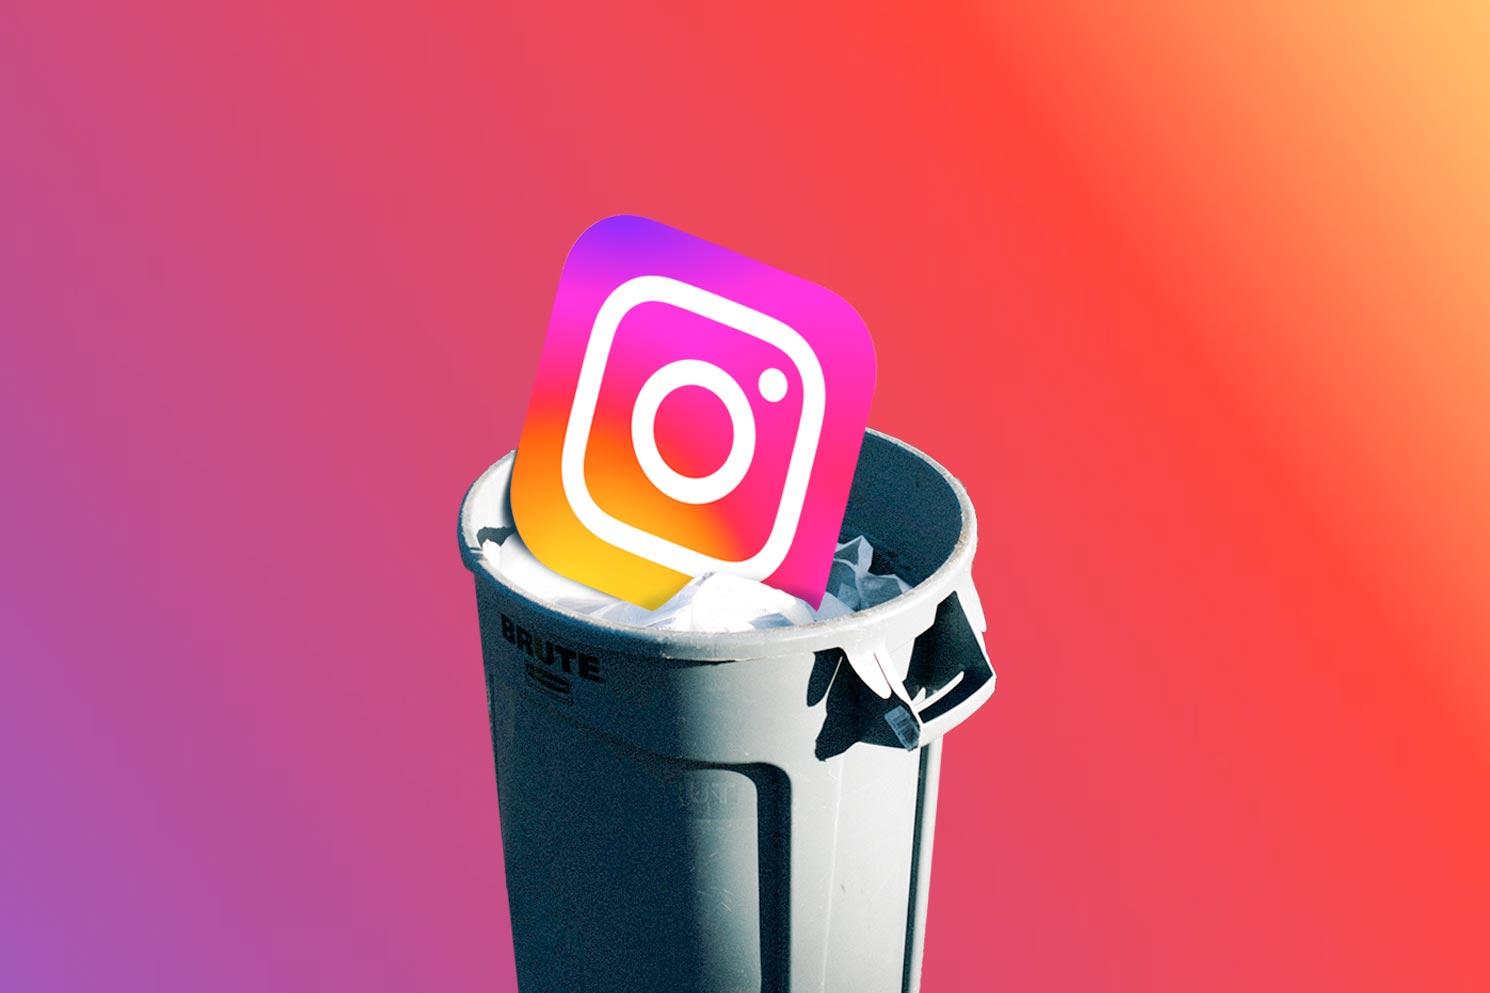 An Instagram logo in a garbage can.